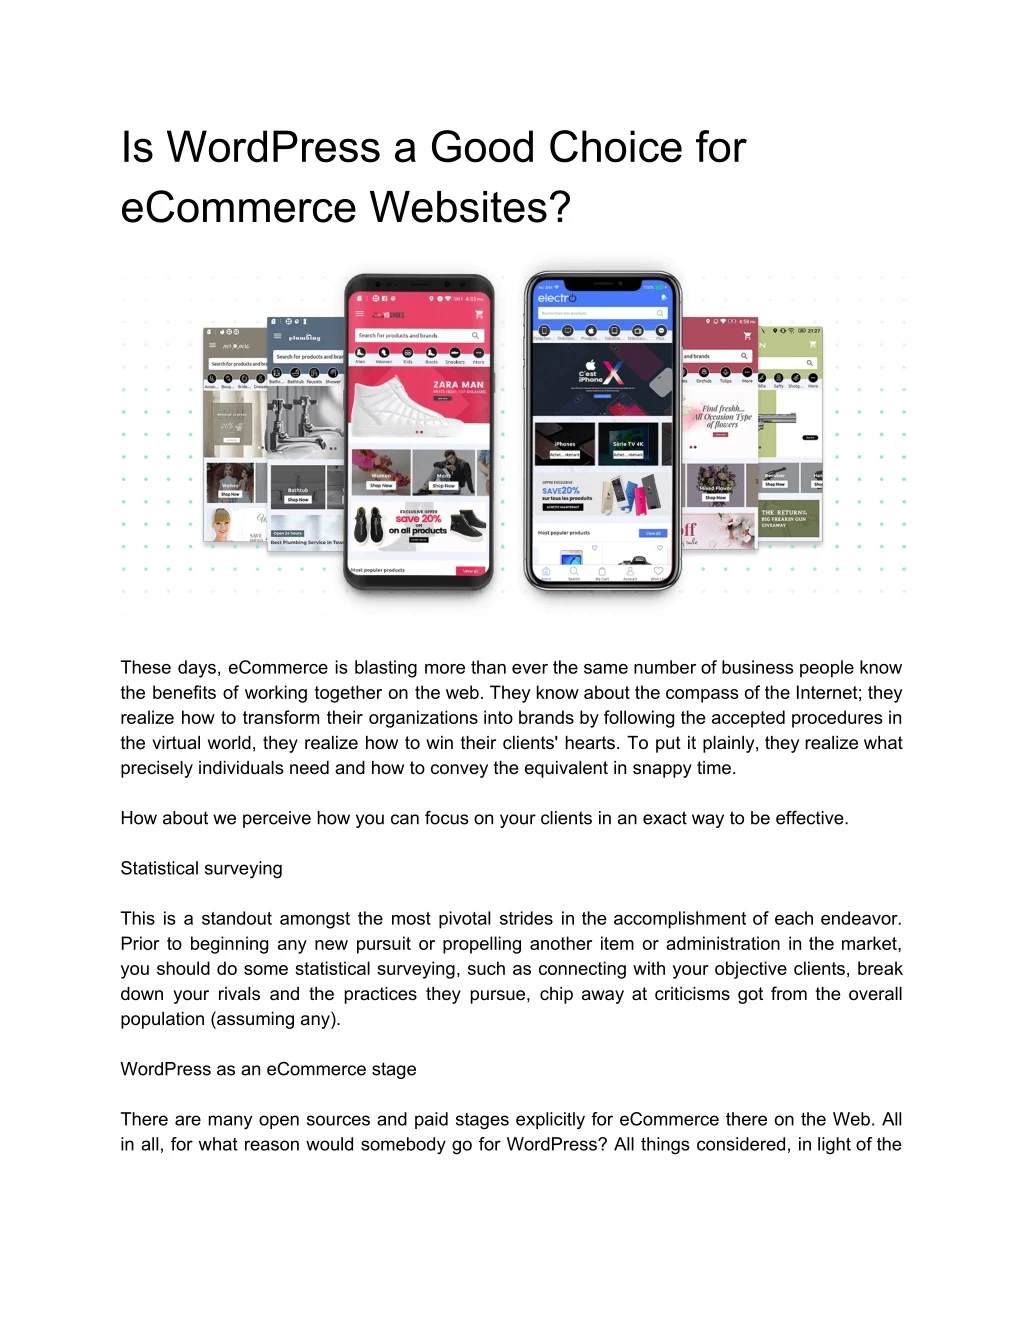 is wordpress a good choice for ecommerce websites